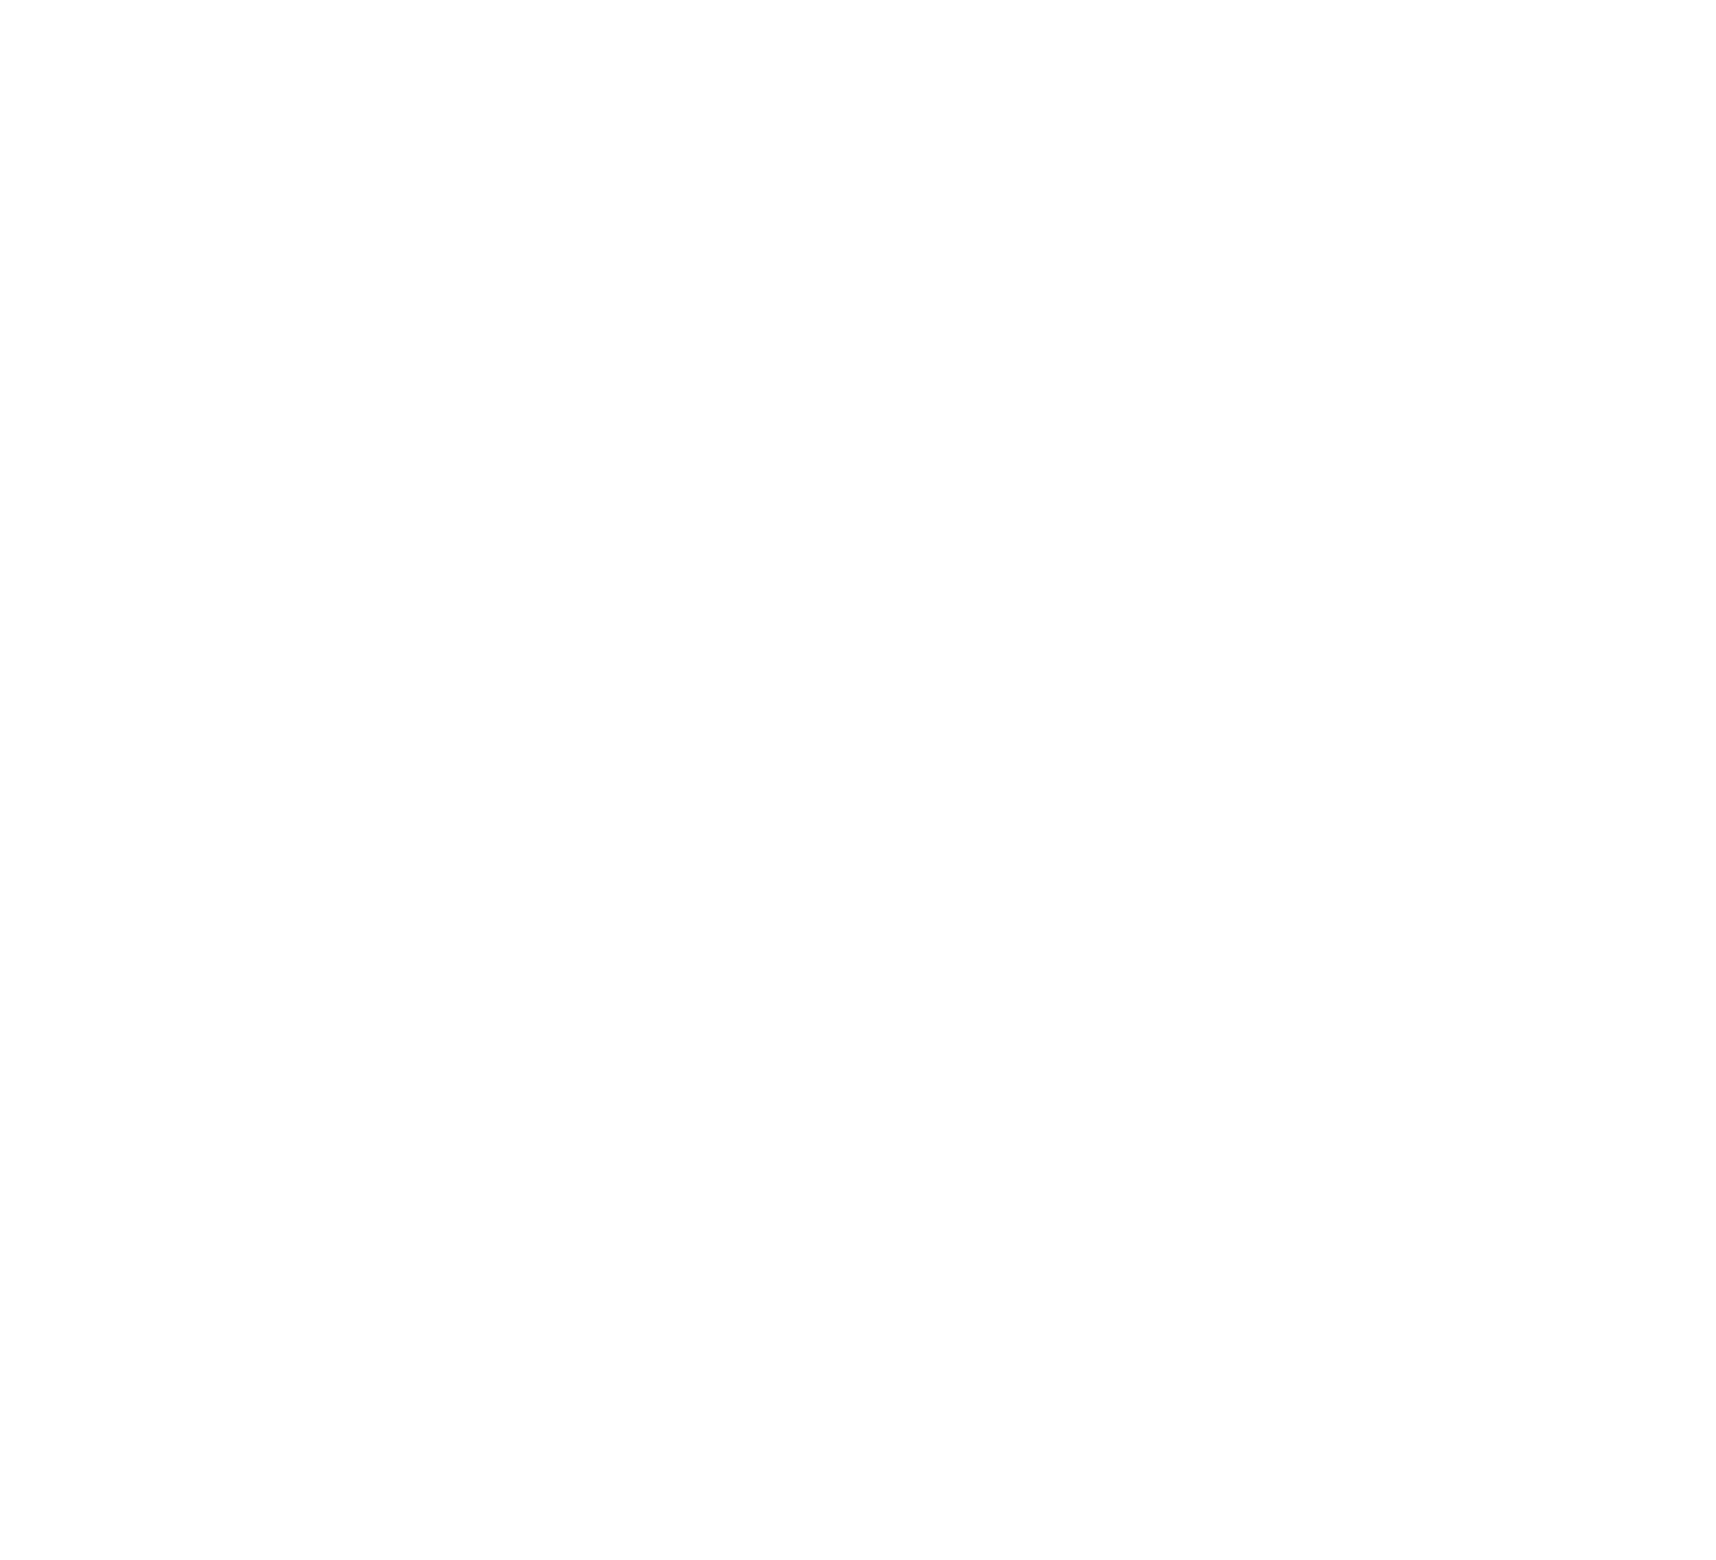 Revive All Nations